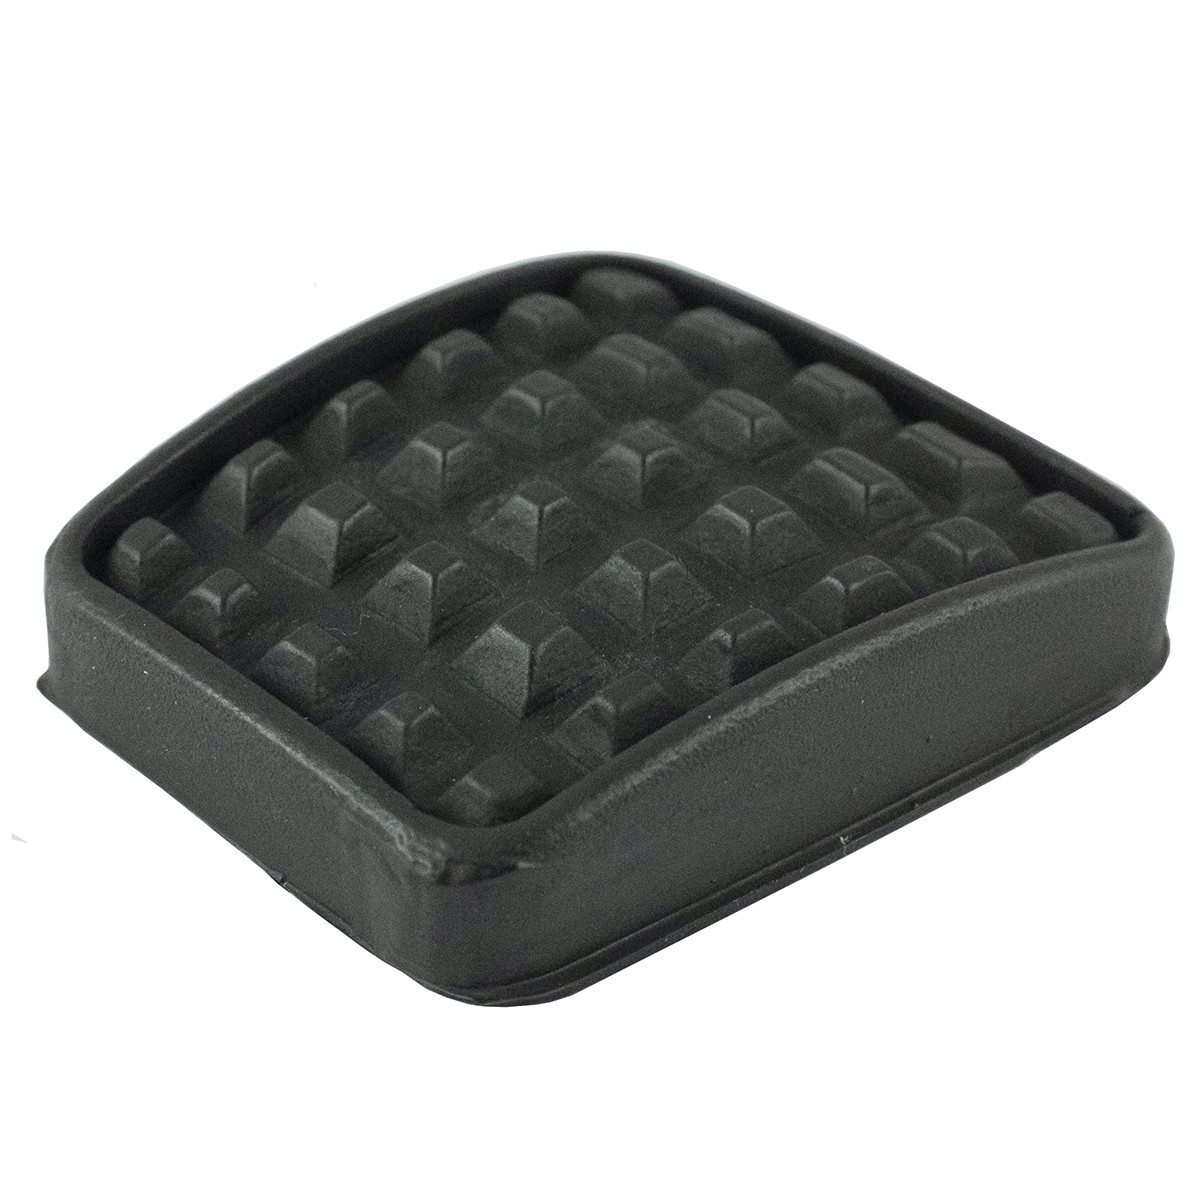 Pedal rubber 53 x 47/40 mm, Kubota rubber cover, 37410-42760